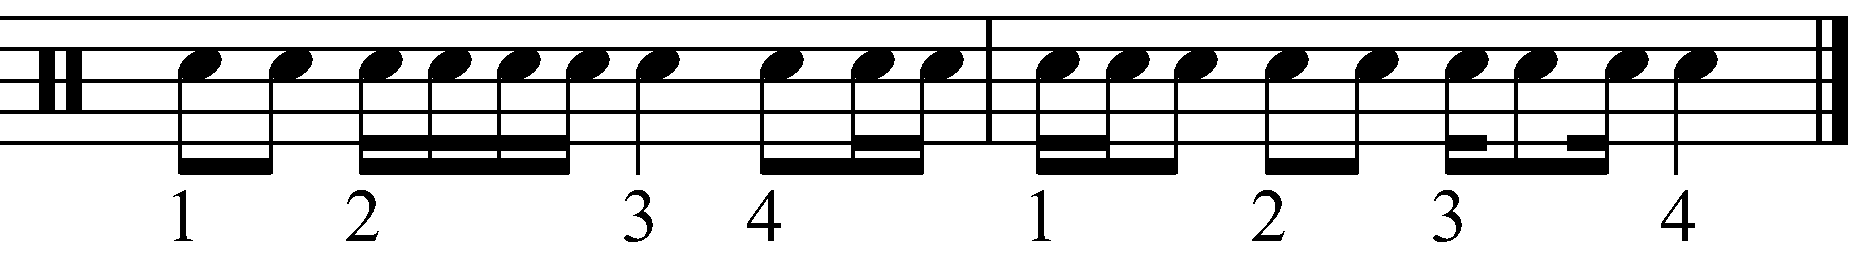 An example snare drum rhythm with numbered counts.